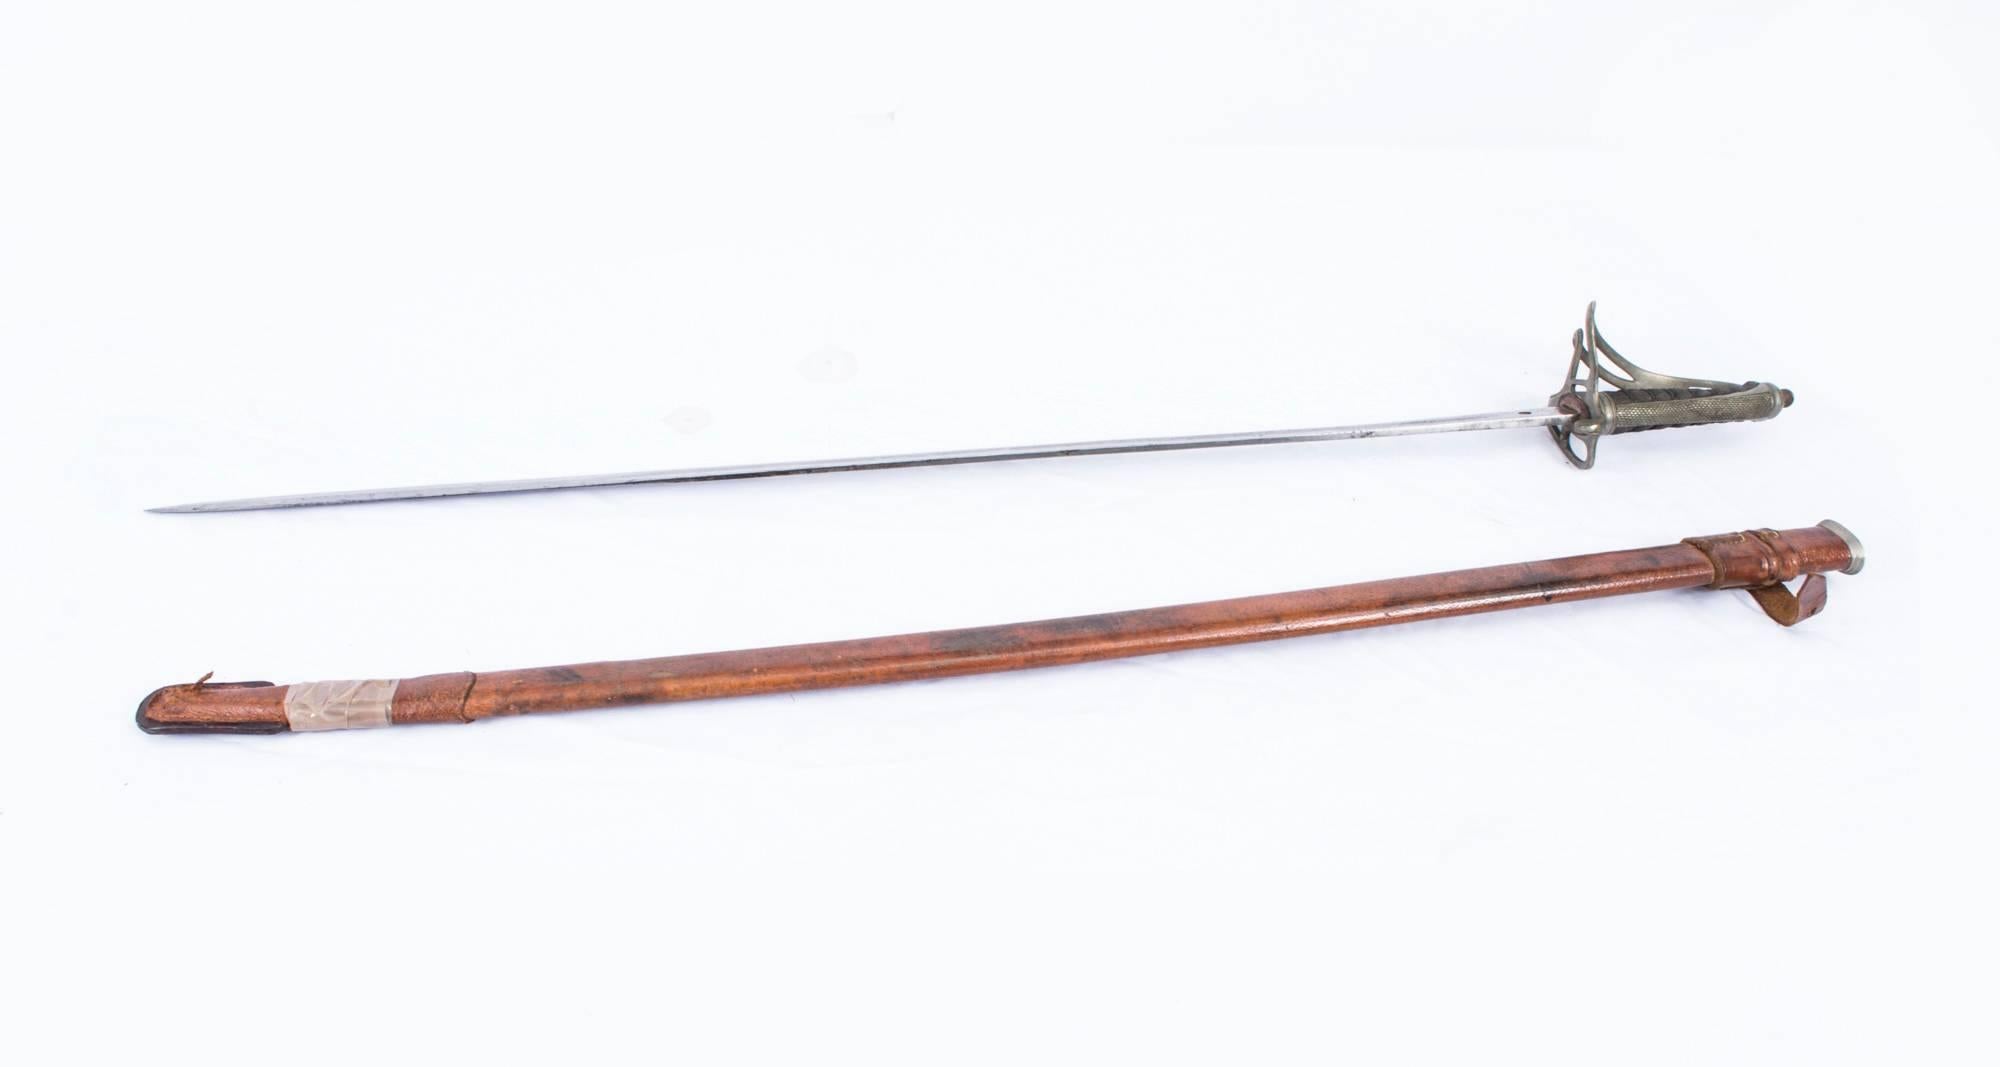 A superb George V Royal Artillery officers sword in leather mounted scabbard, circa 1910 in date.

The sword features a silvered openwork and shagreen hilt with a single etched blade, double edged at the point, cut with a long deep central fuller